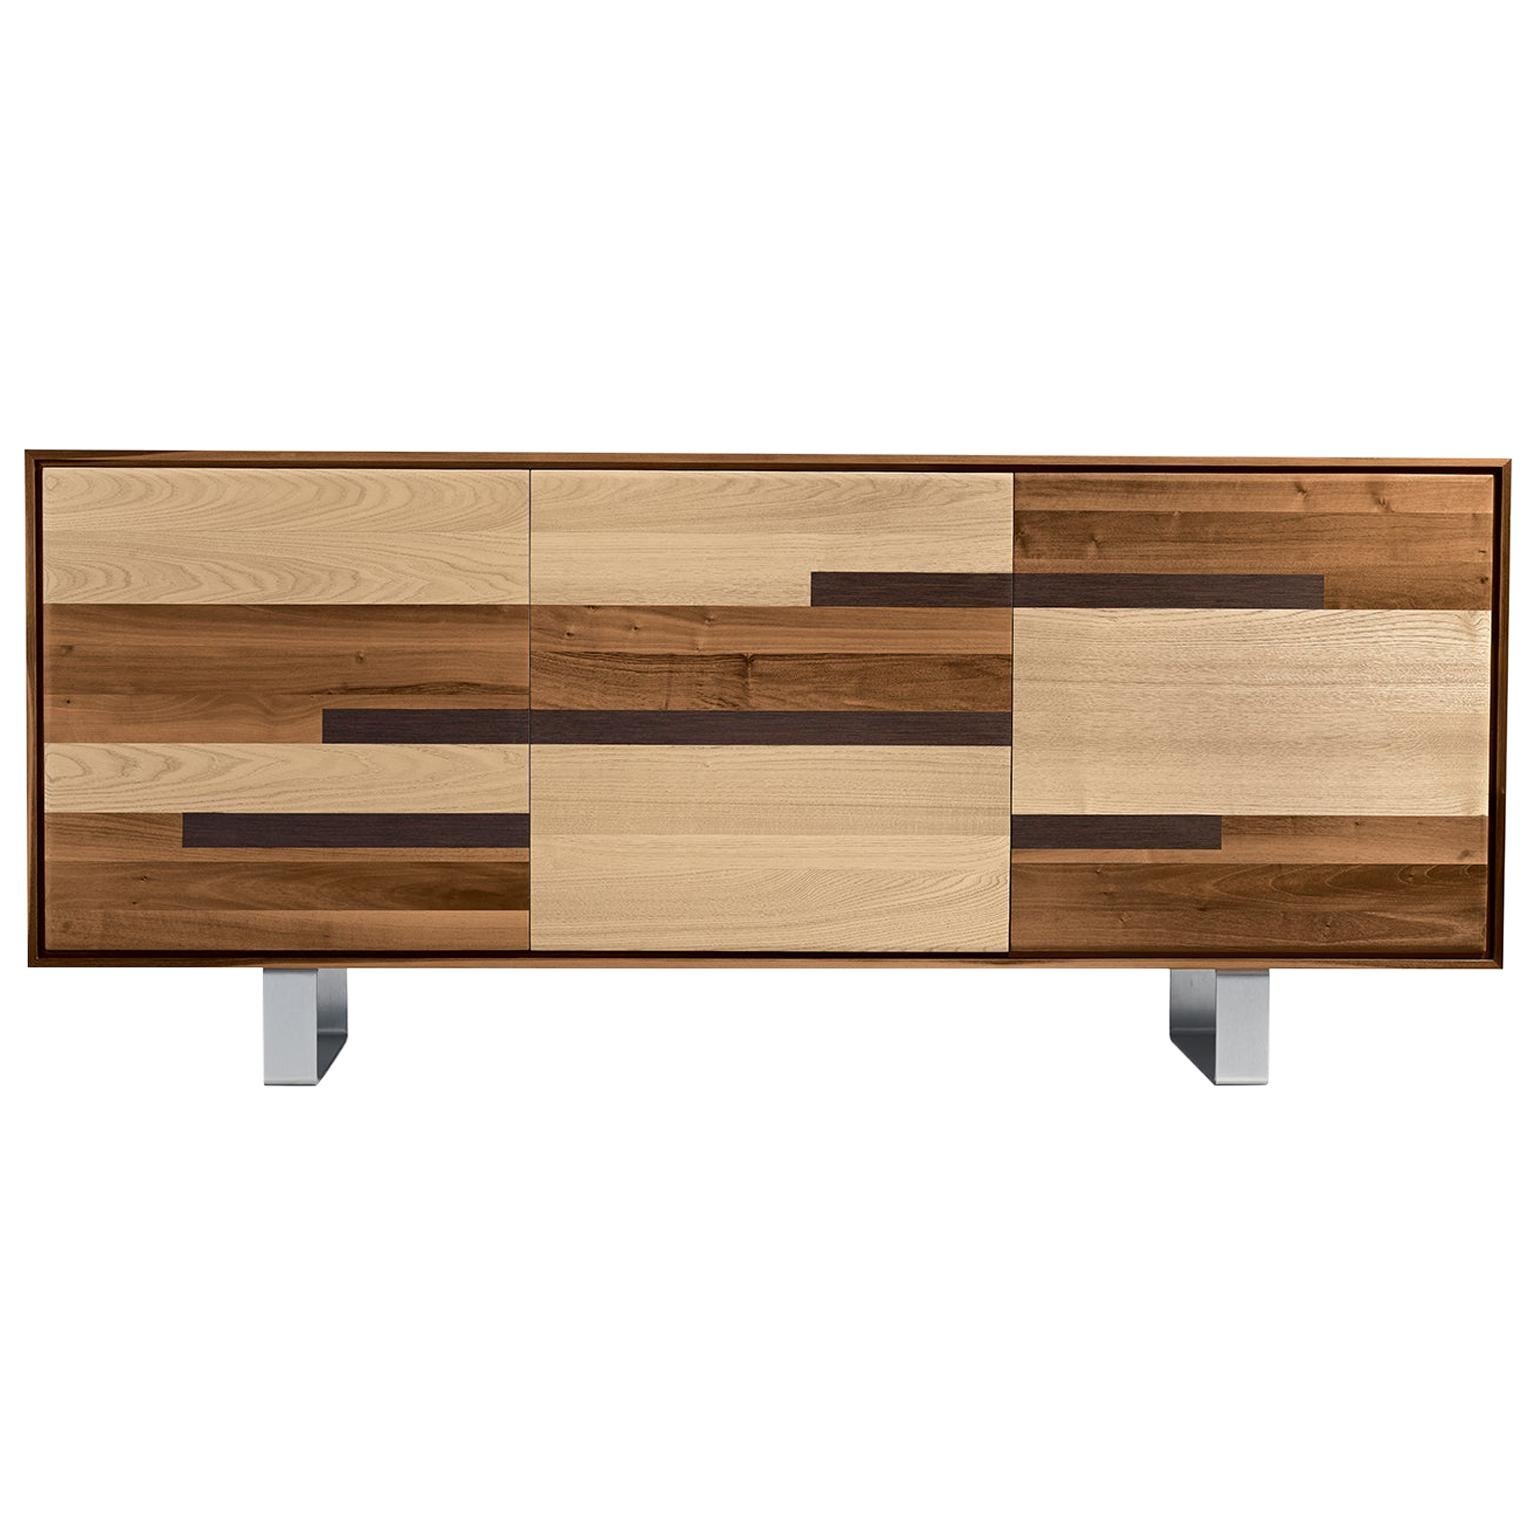 Materia Natura Solid Wood Sideboard, Walnut in Natural Finish, Contemporary